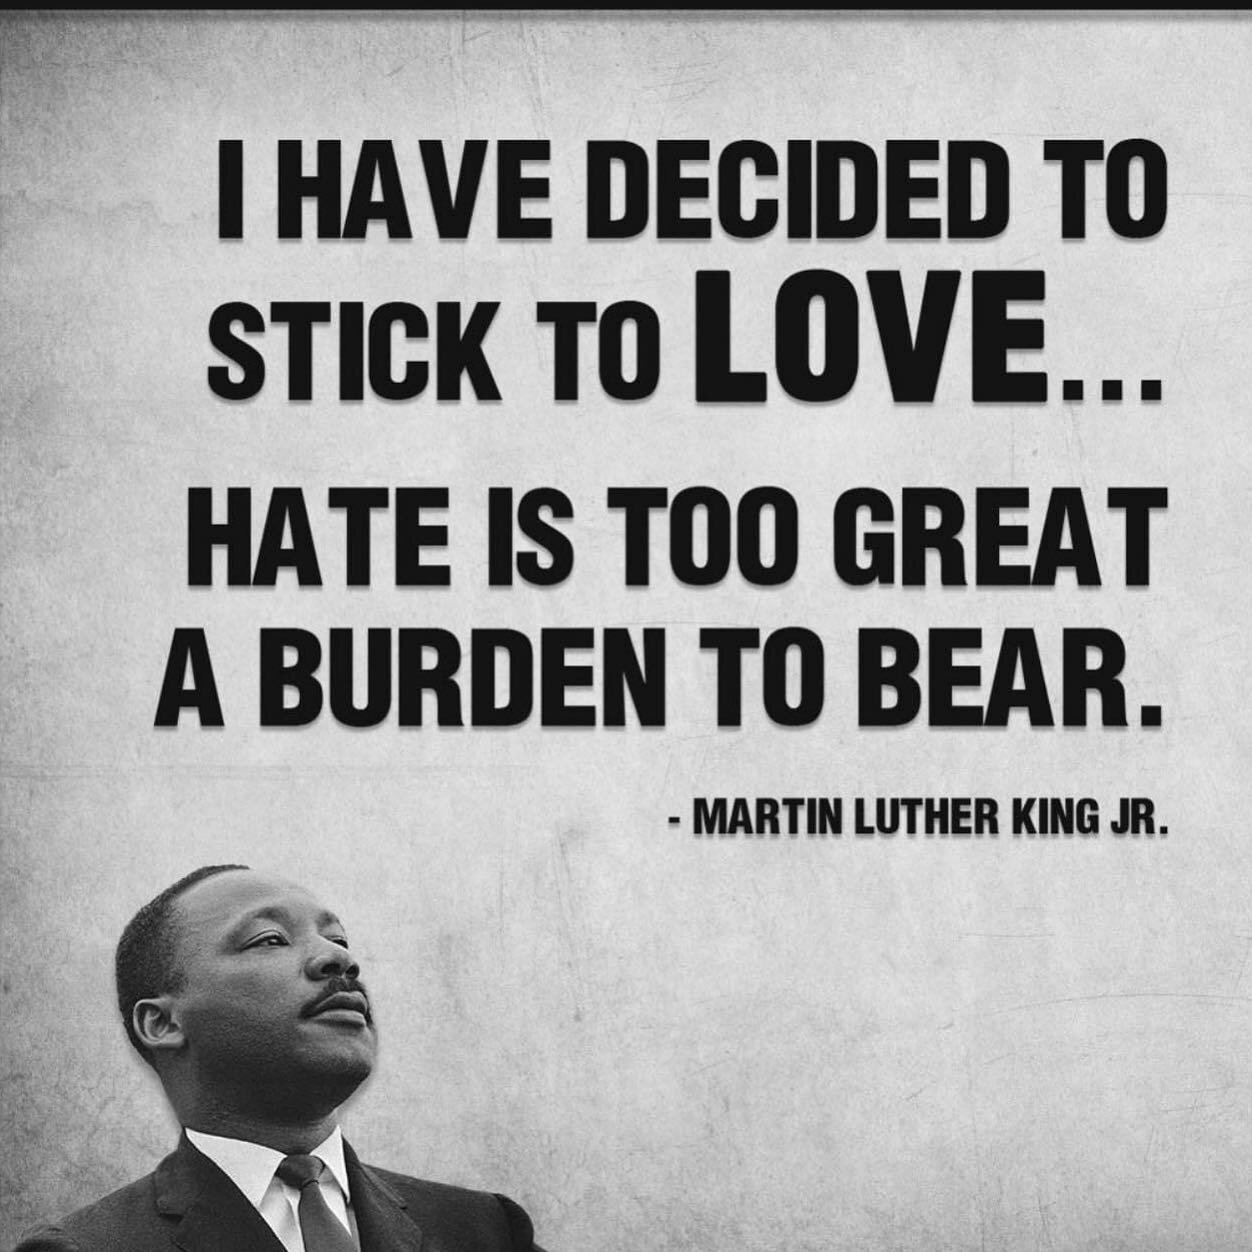 Great quote from an even greater man. Honoring him today. Looking forward with love and light for 2021!  #martinlutherking #love #mlkday #acropolistech